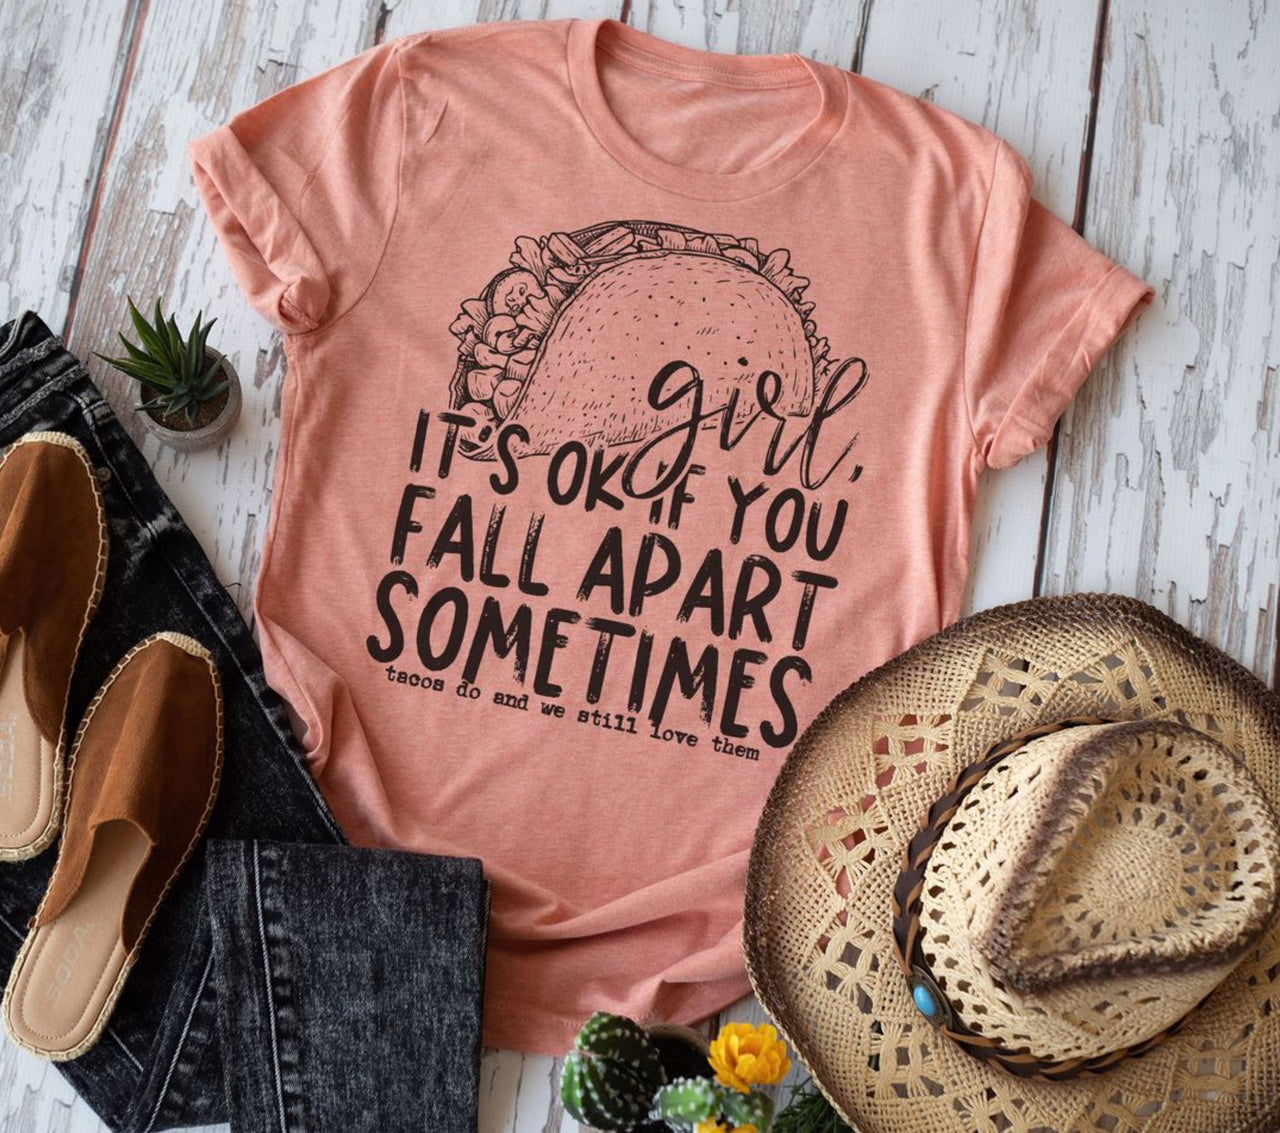 Adult - Unisex Tee (Girl It's Ok if you fall apart sometimes)